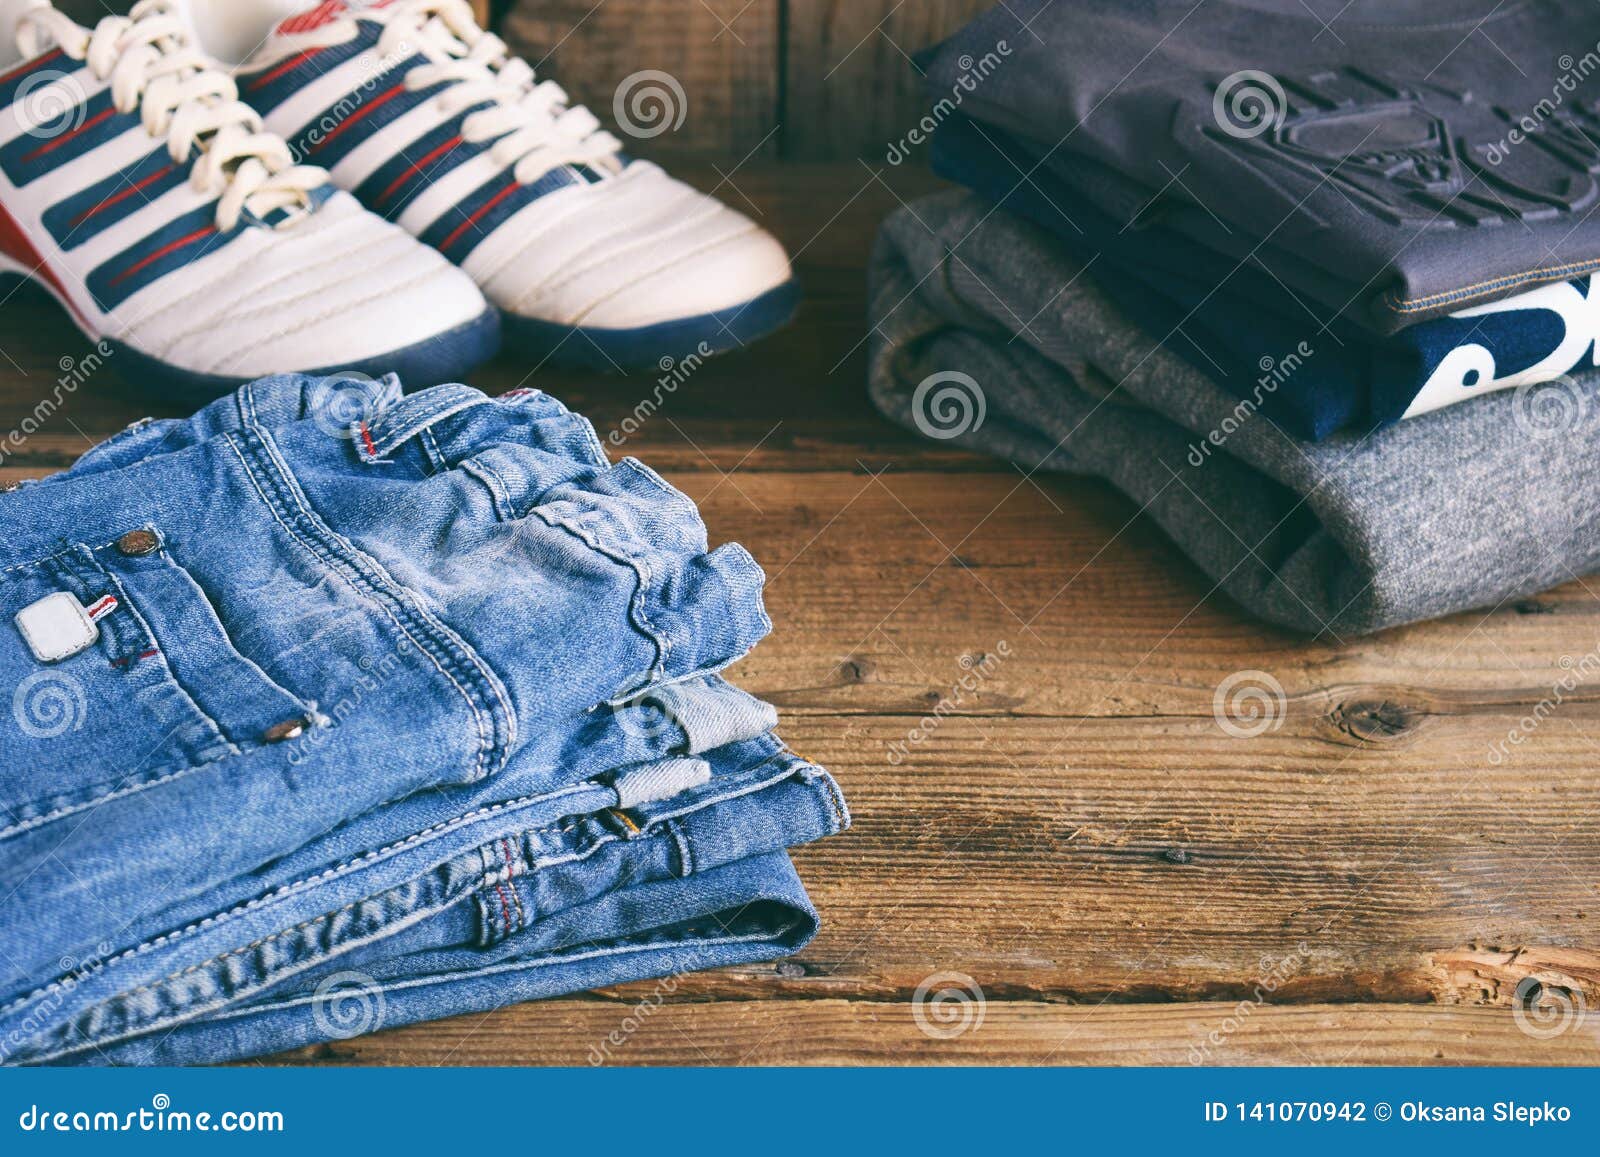 Teenager Casual Outfit. Boys Shoes, Clothing And Accessories On Wooden ...